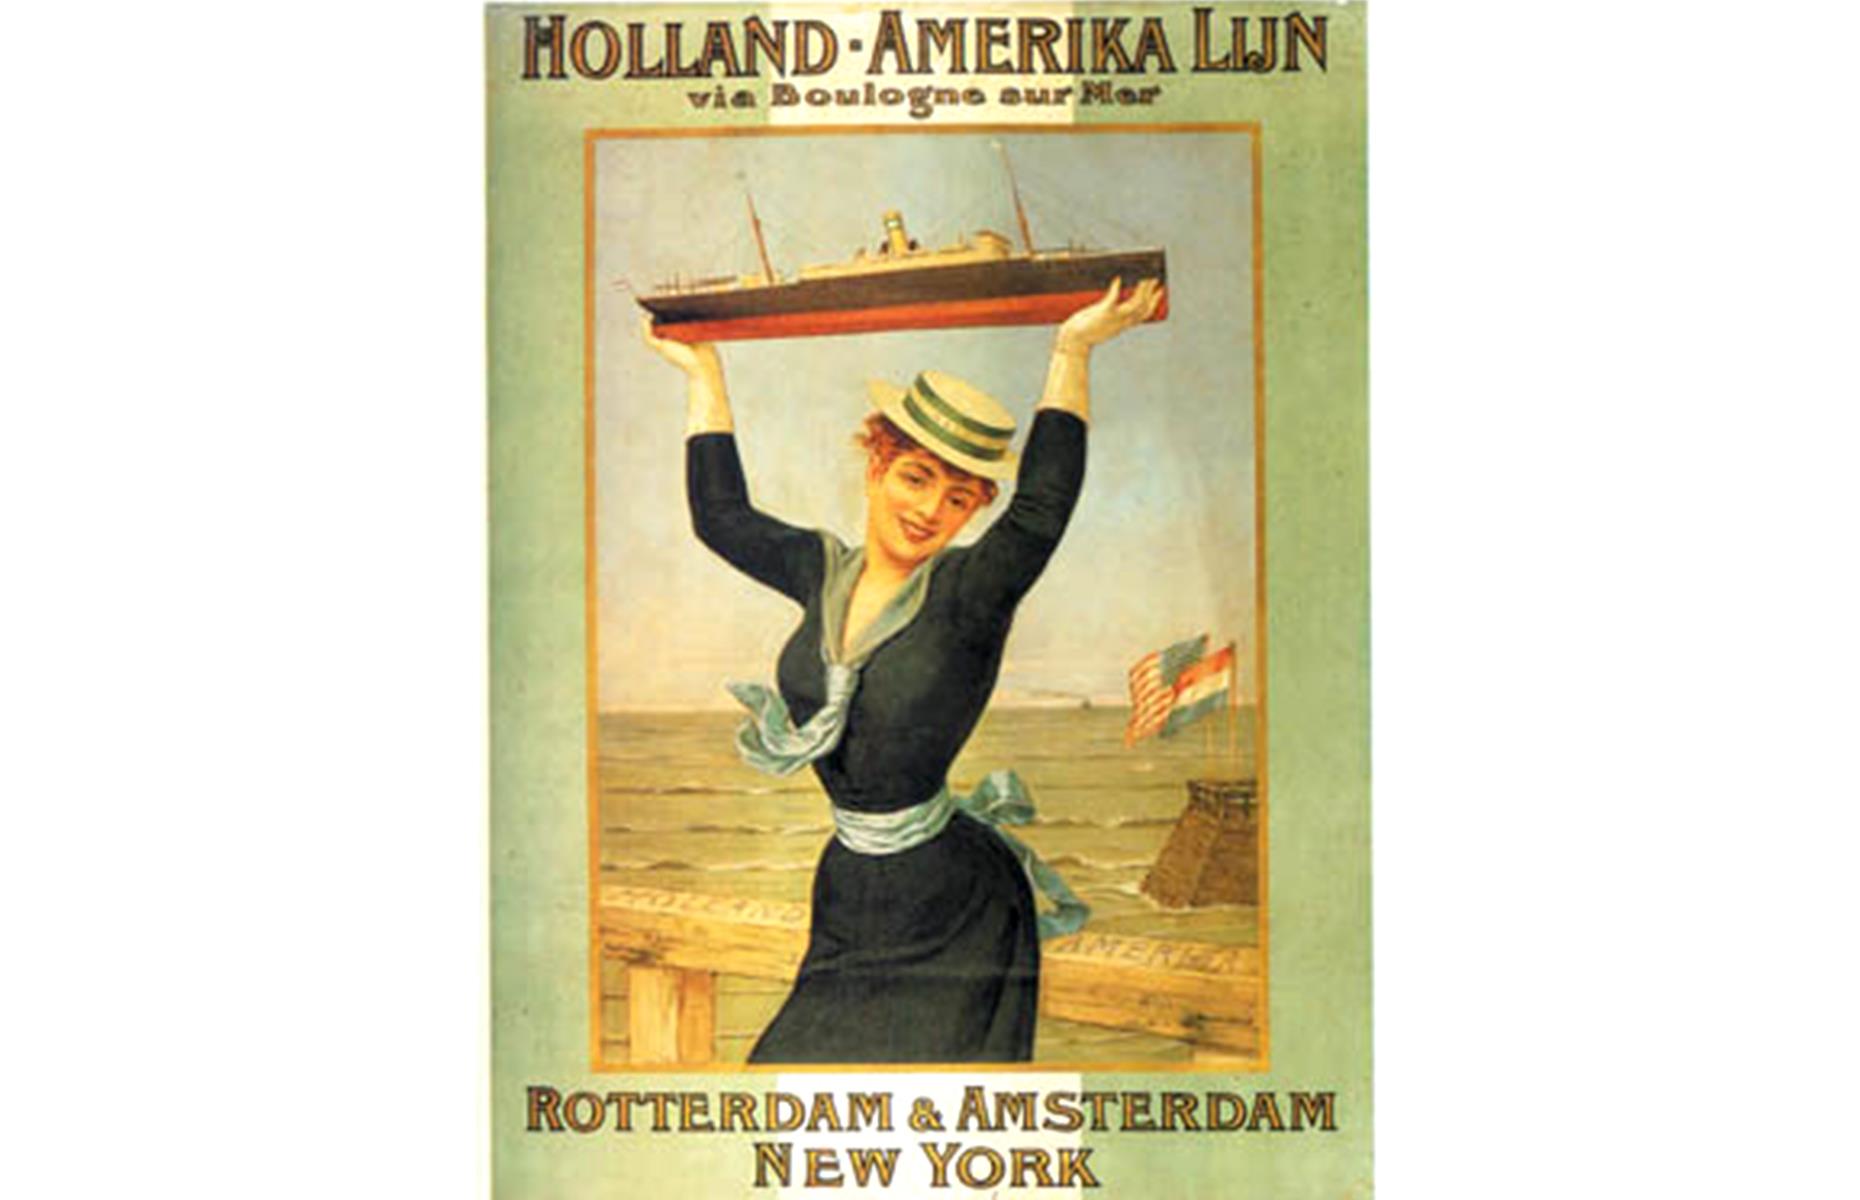 Business and pleasure weren't the only reasons for taking to the waves, though – in the 1870s, European immigrants were traveling to America in great numbers. Lines like the Holland America Line, launched in 1873, became famous for transporting great waves of people searching for a new life in the New World. This fun advert for the company dates to 1898.